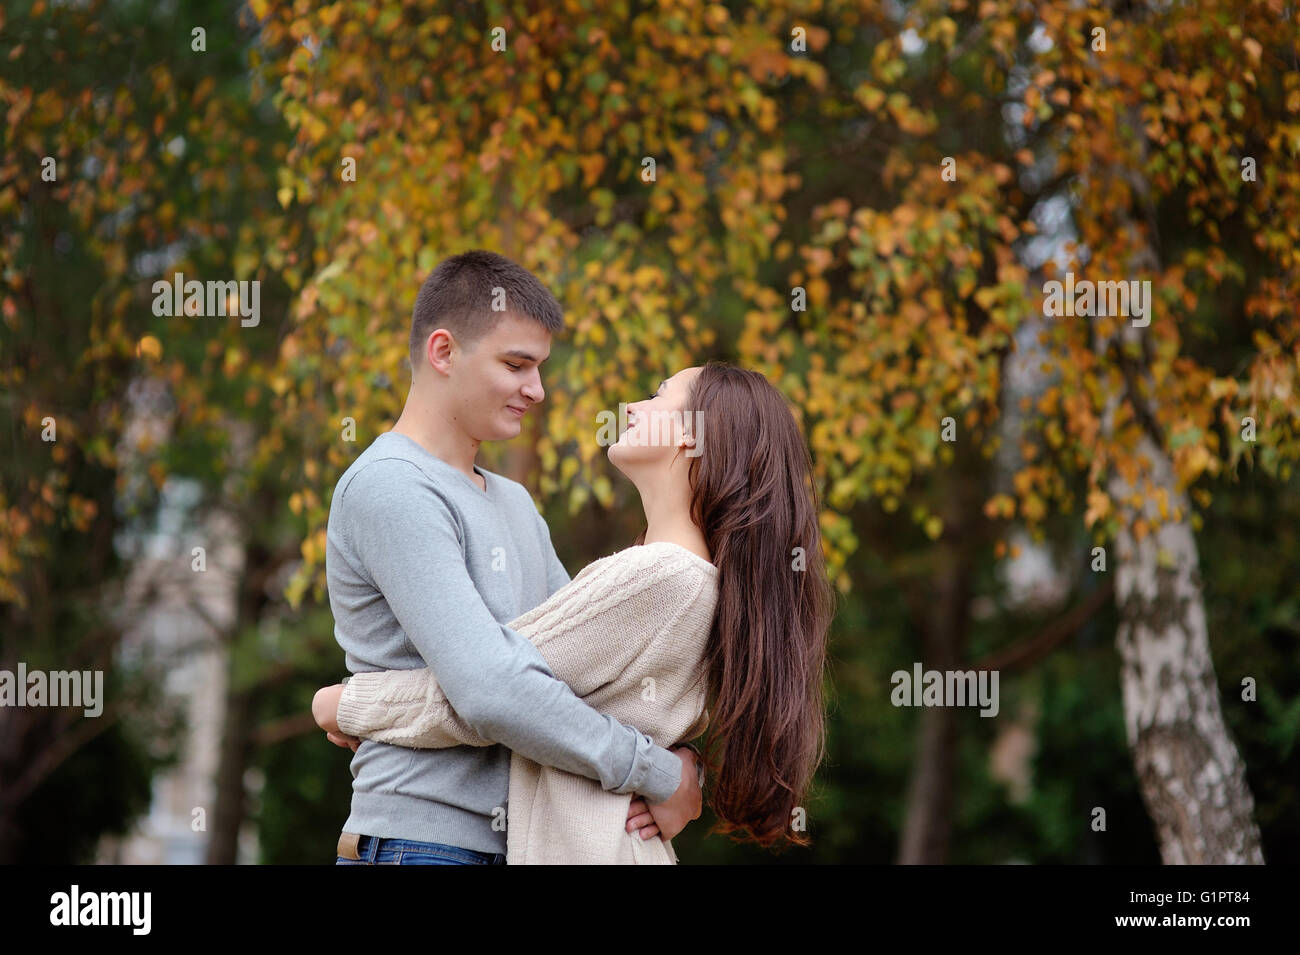 happy young couple embracing outdoor in the autumn park Stock Photo